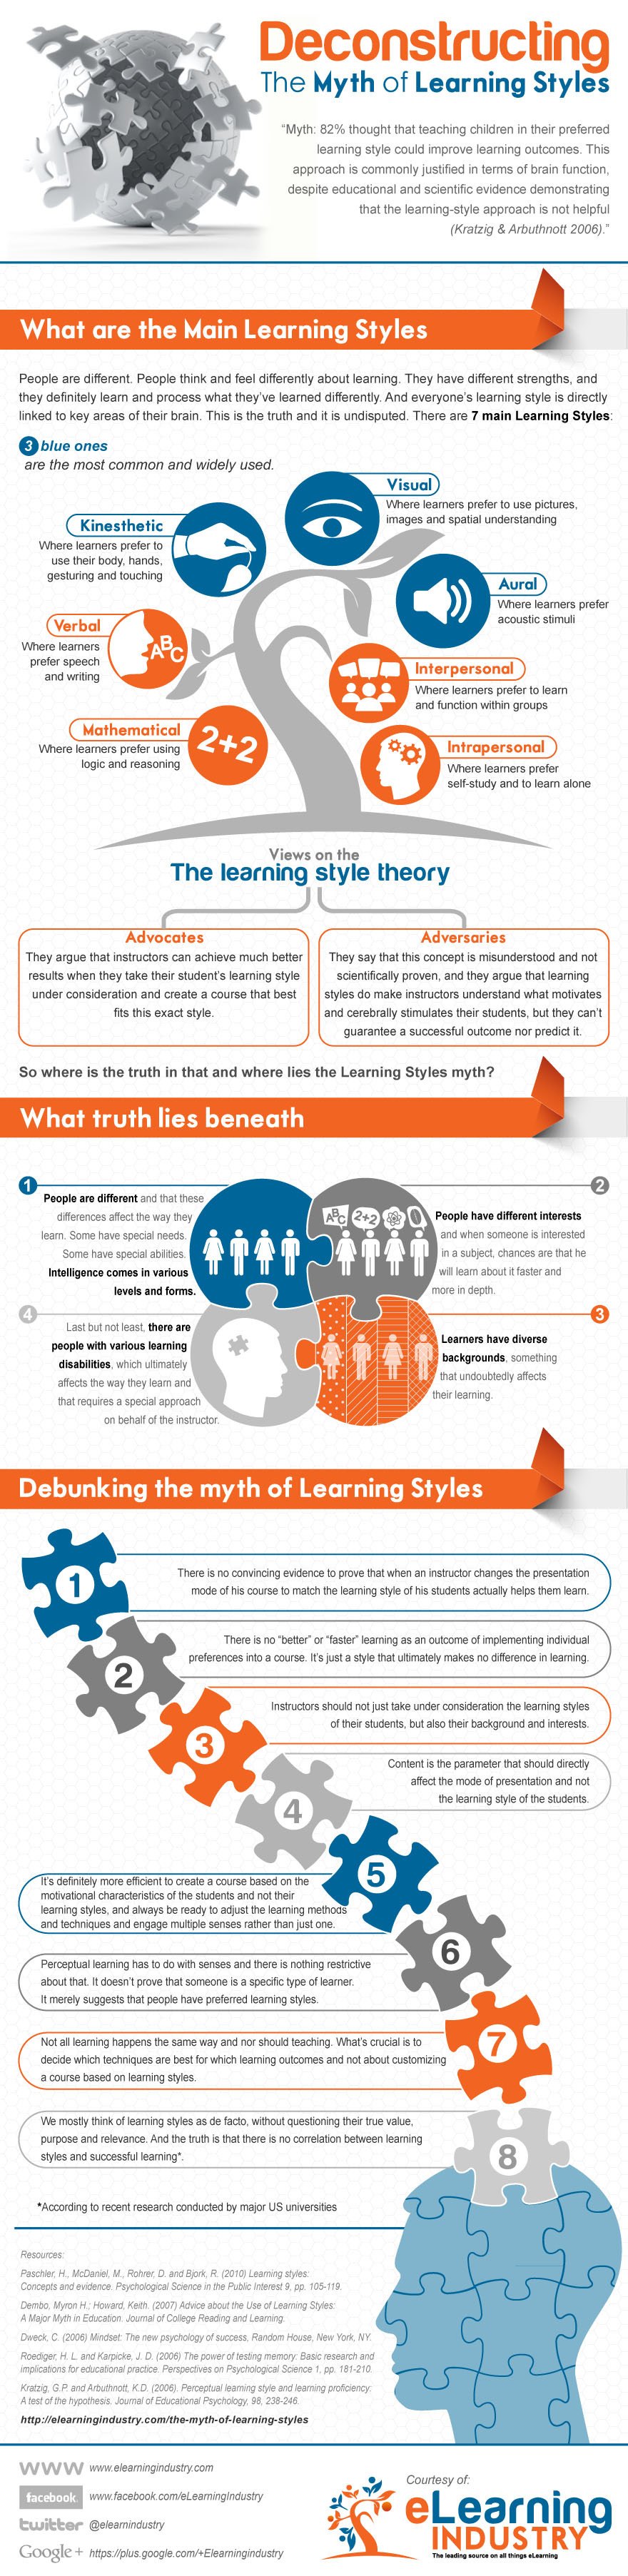 Different learning styles for different people